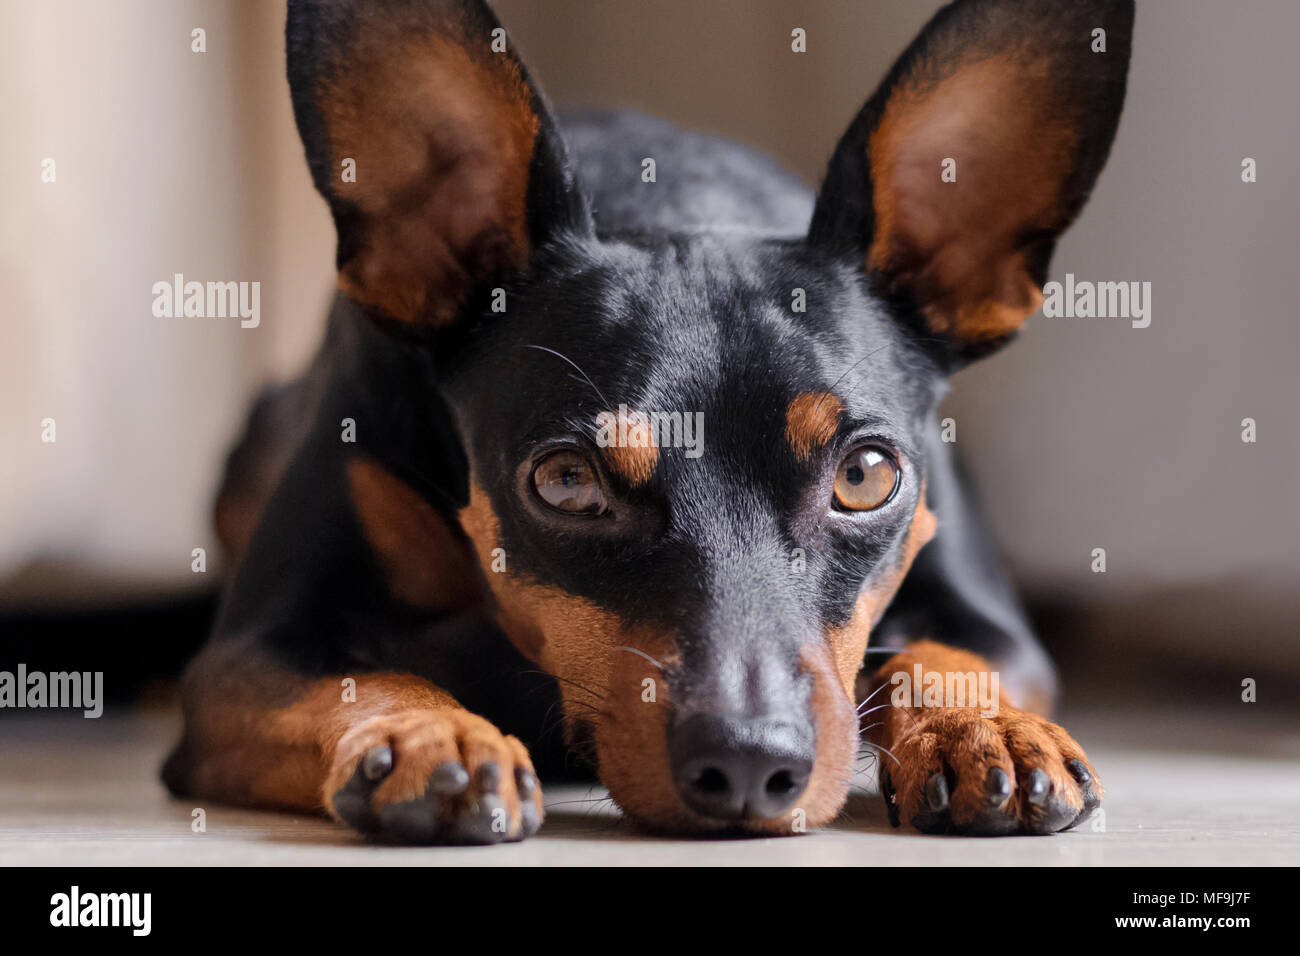 the dwarf pinscher looks into the eyes. Portrait of a dog. Sad look Stock Photo